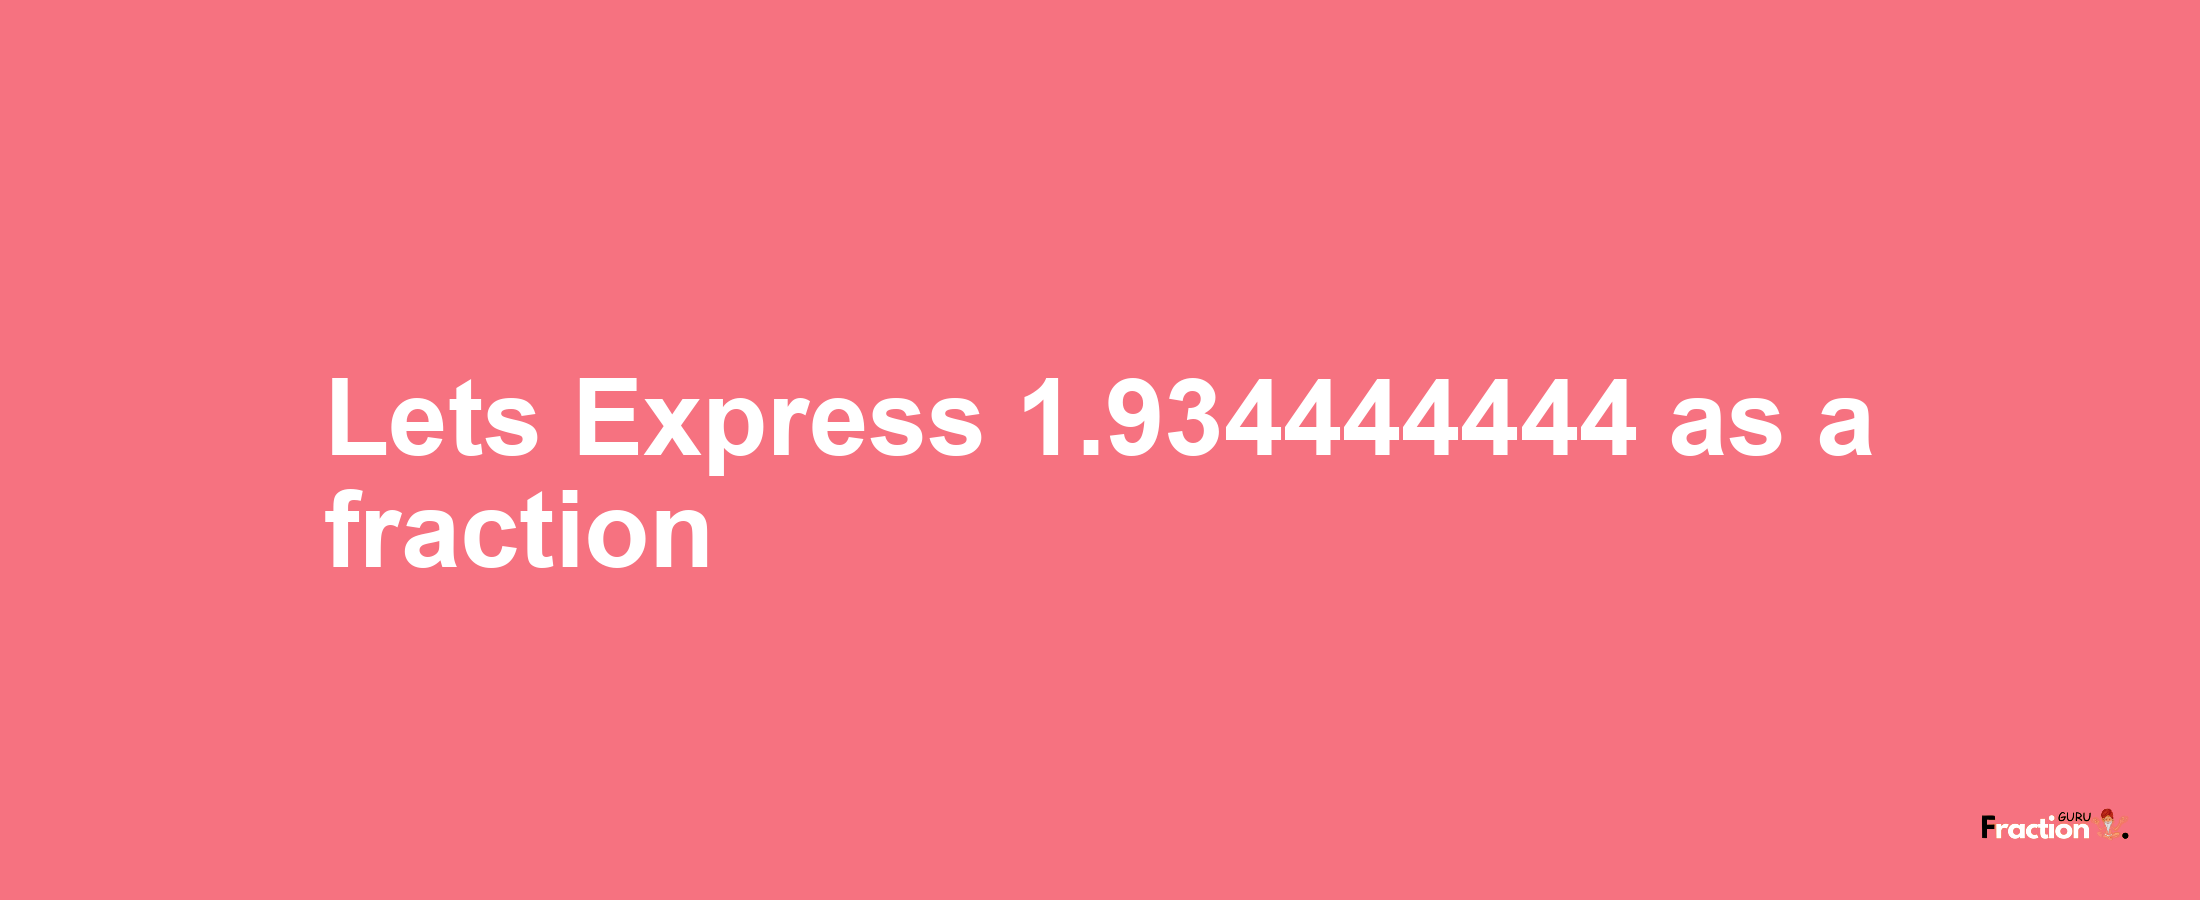 Lets Express 1.934444444 as afraction